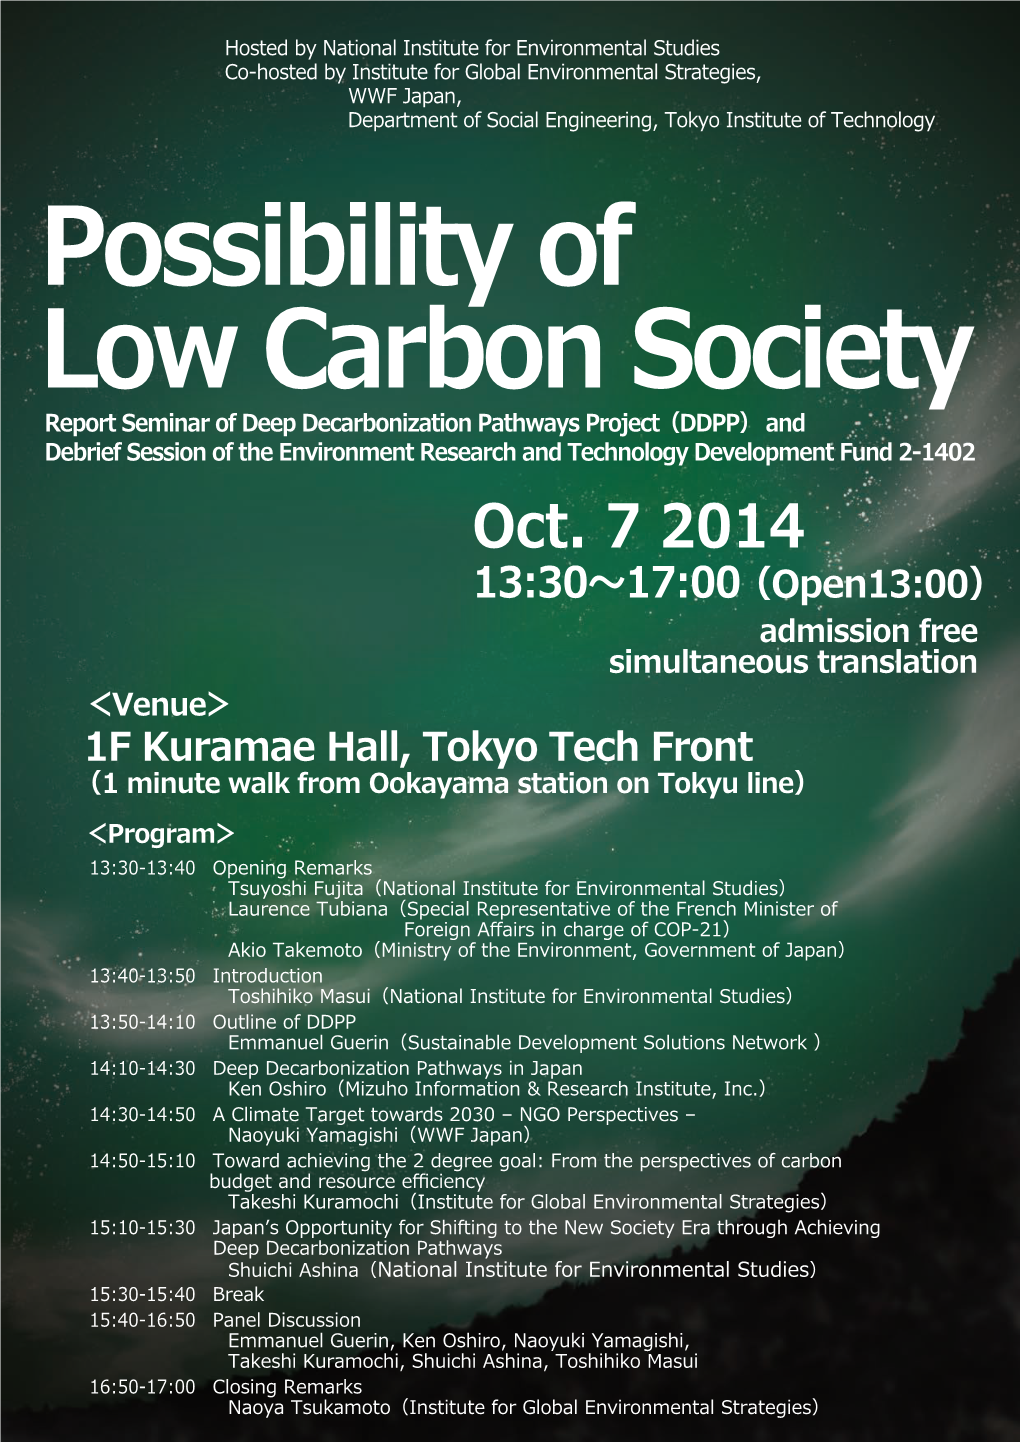 Possibility of Low Carbon Society